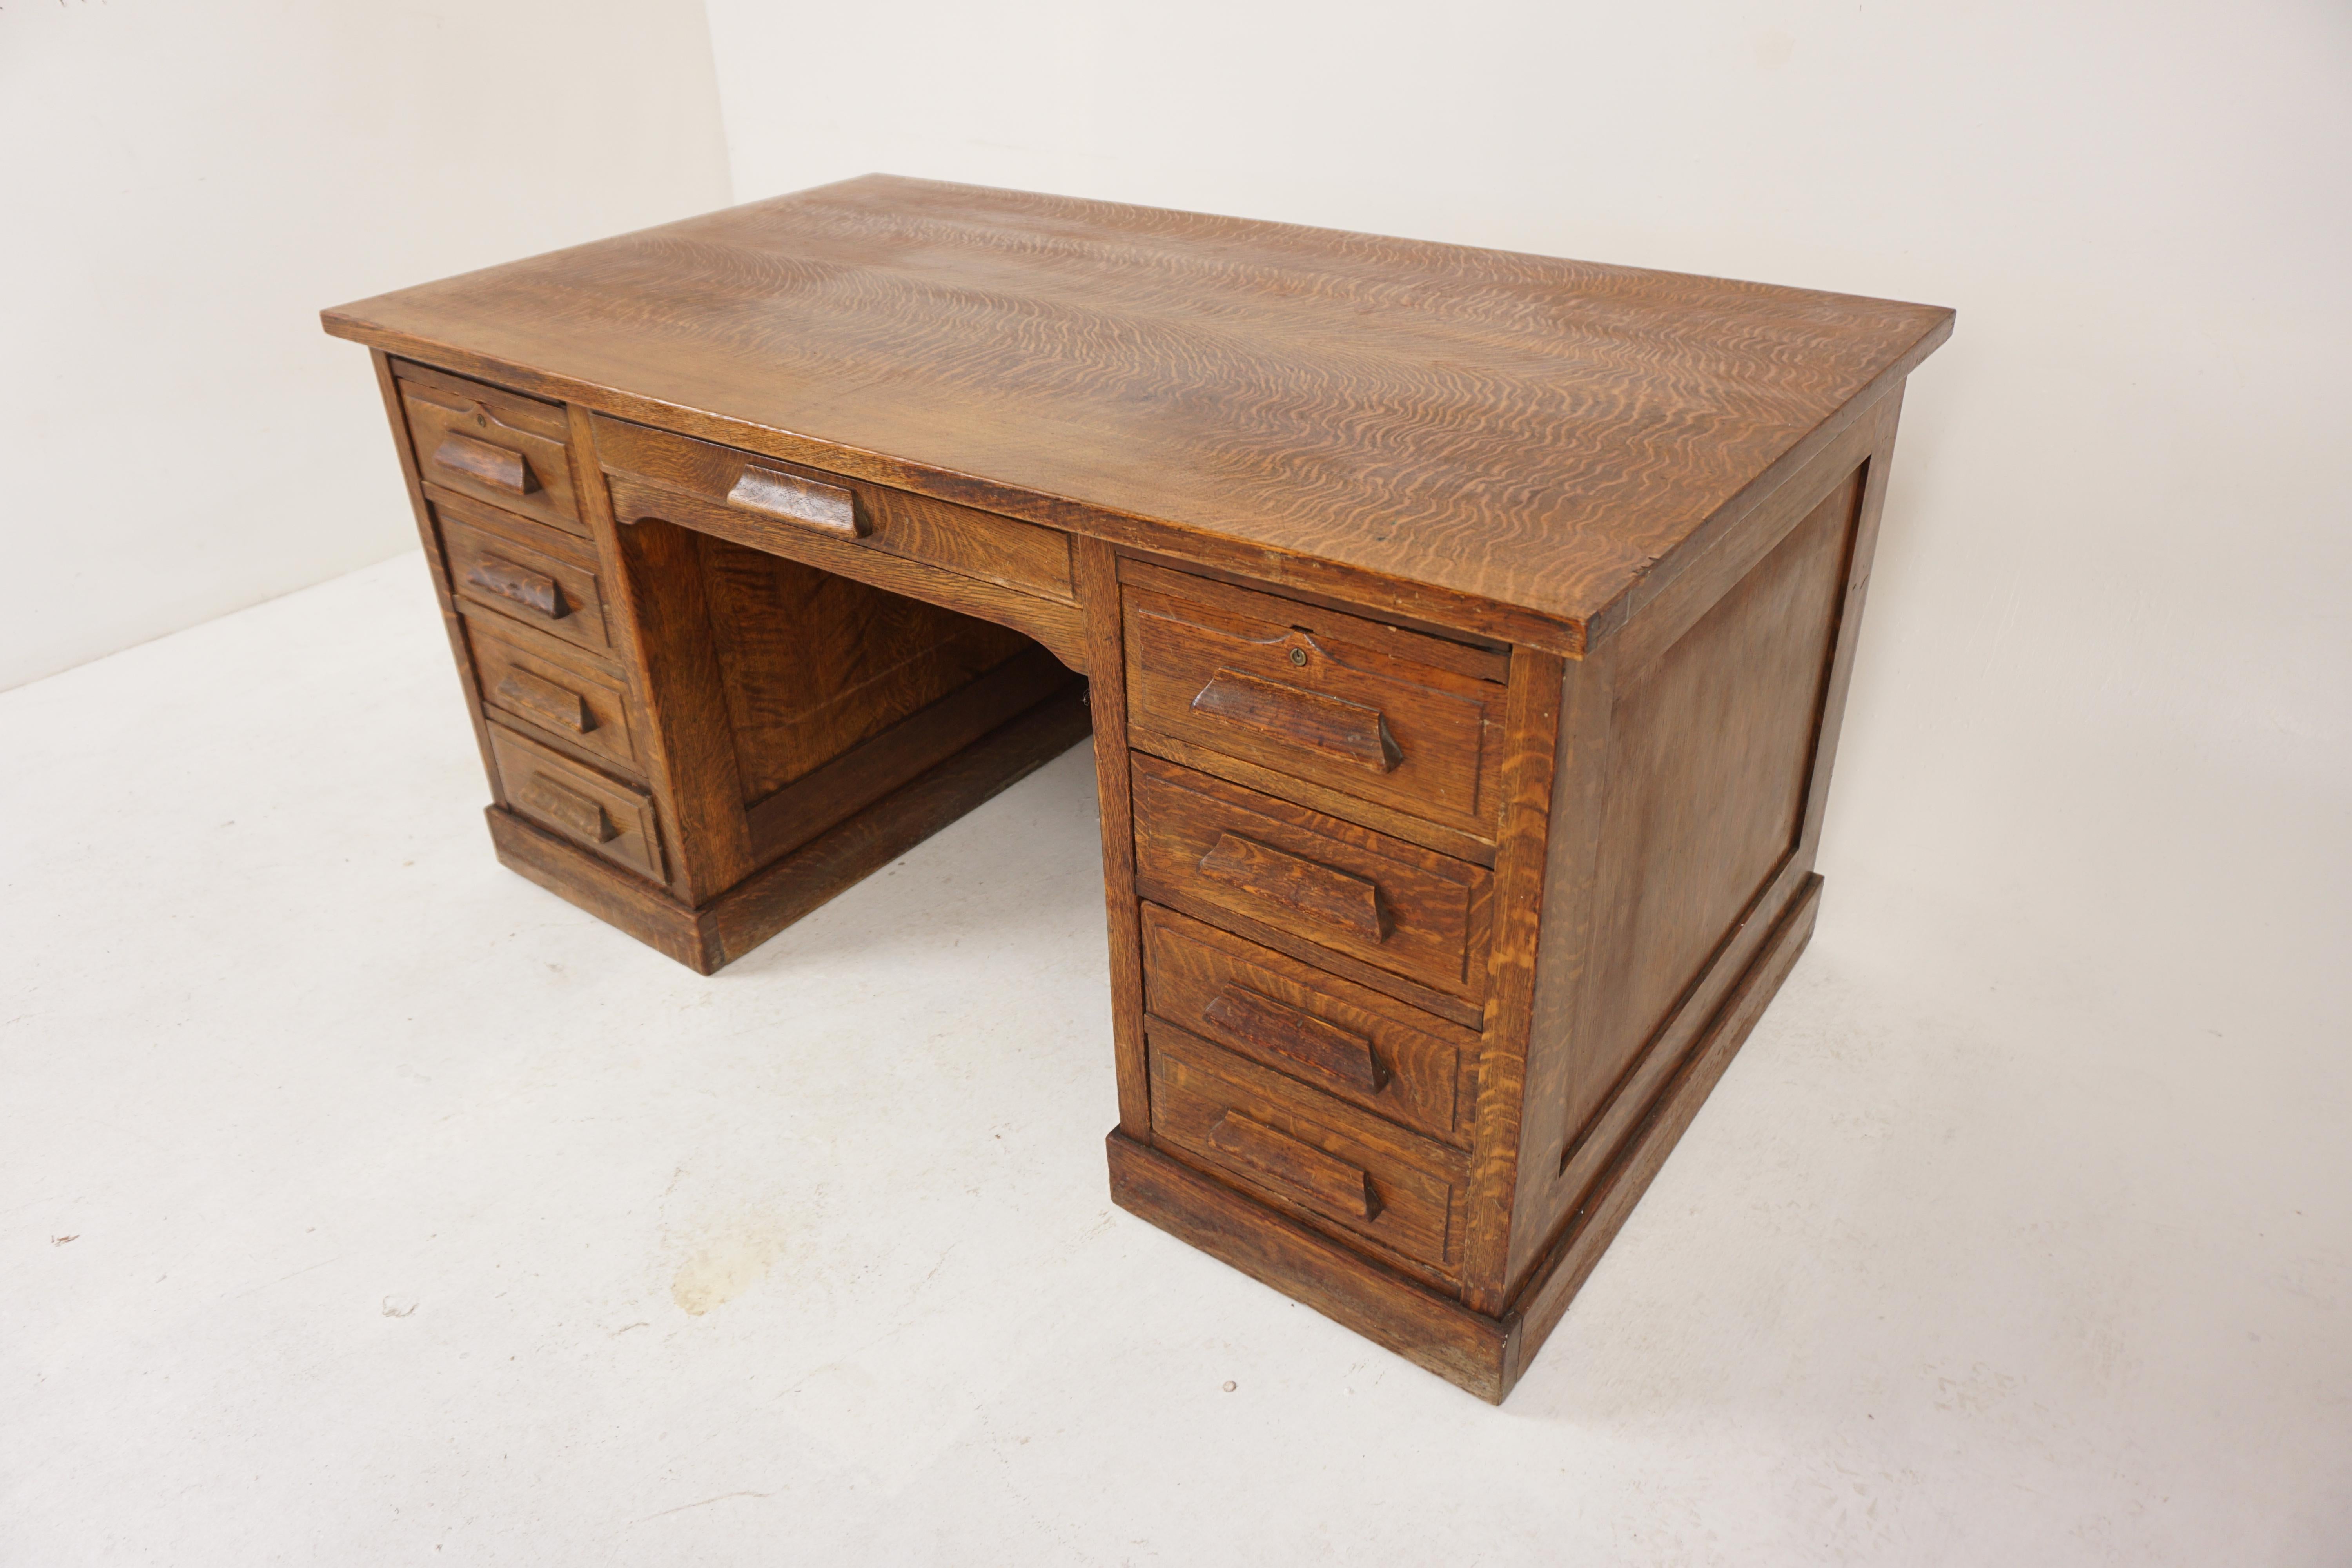 Antique Tiger Oak Double Pedestal Free Standing Desk, Scotland 1900, H936

Scotland 1920
Solid oak 
Original Finish
Rectangular moulded top
With tambour front
Opening to reveal numerous drawers and pigeon holes
The front with three drawers to the